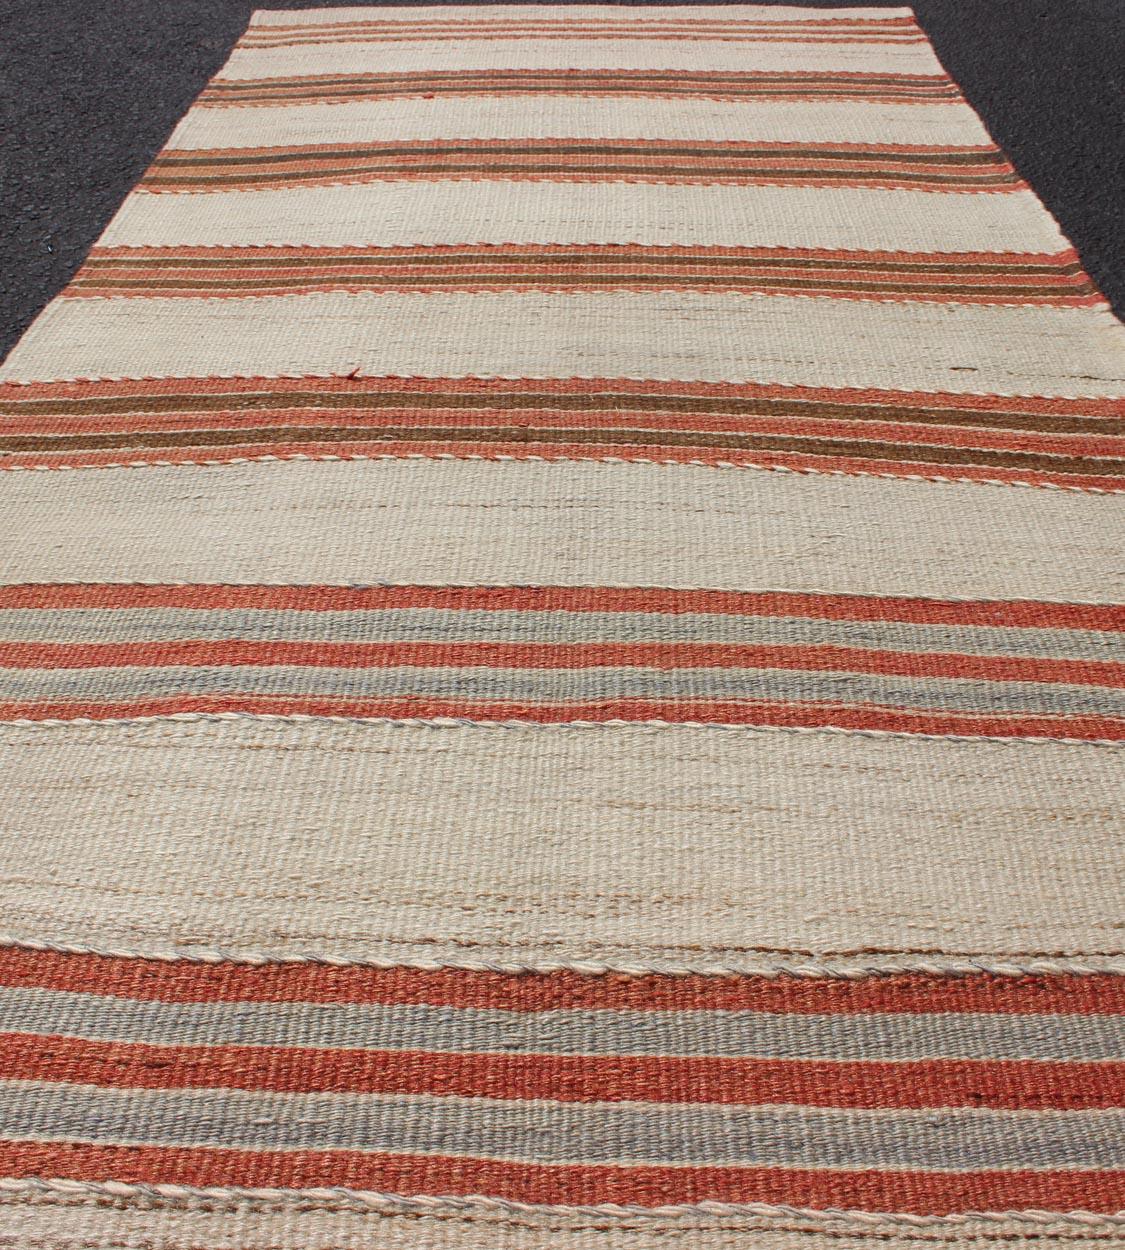 Striped Turkish Vintage Kilim Flat-Weave Rug in Shades of Red, Brown, and Ivory 1